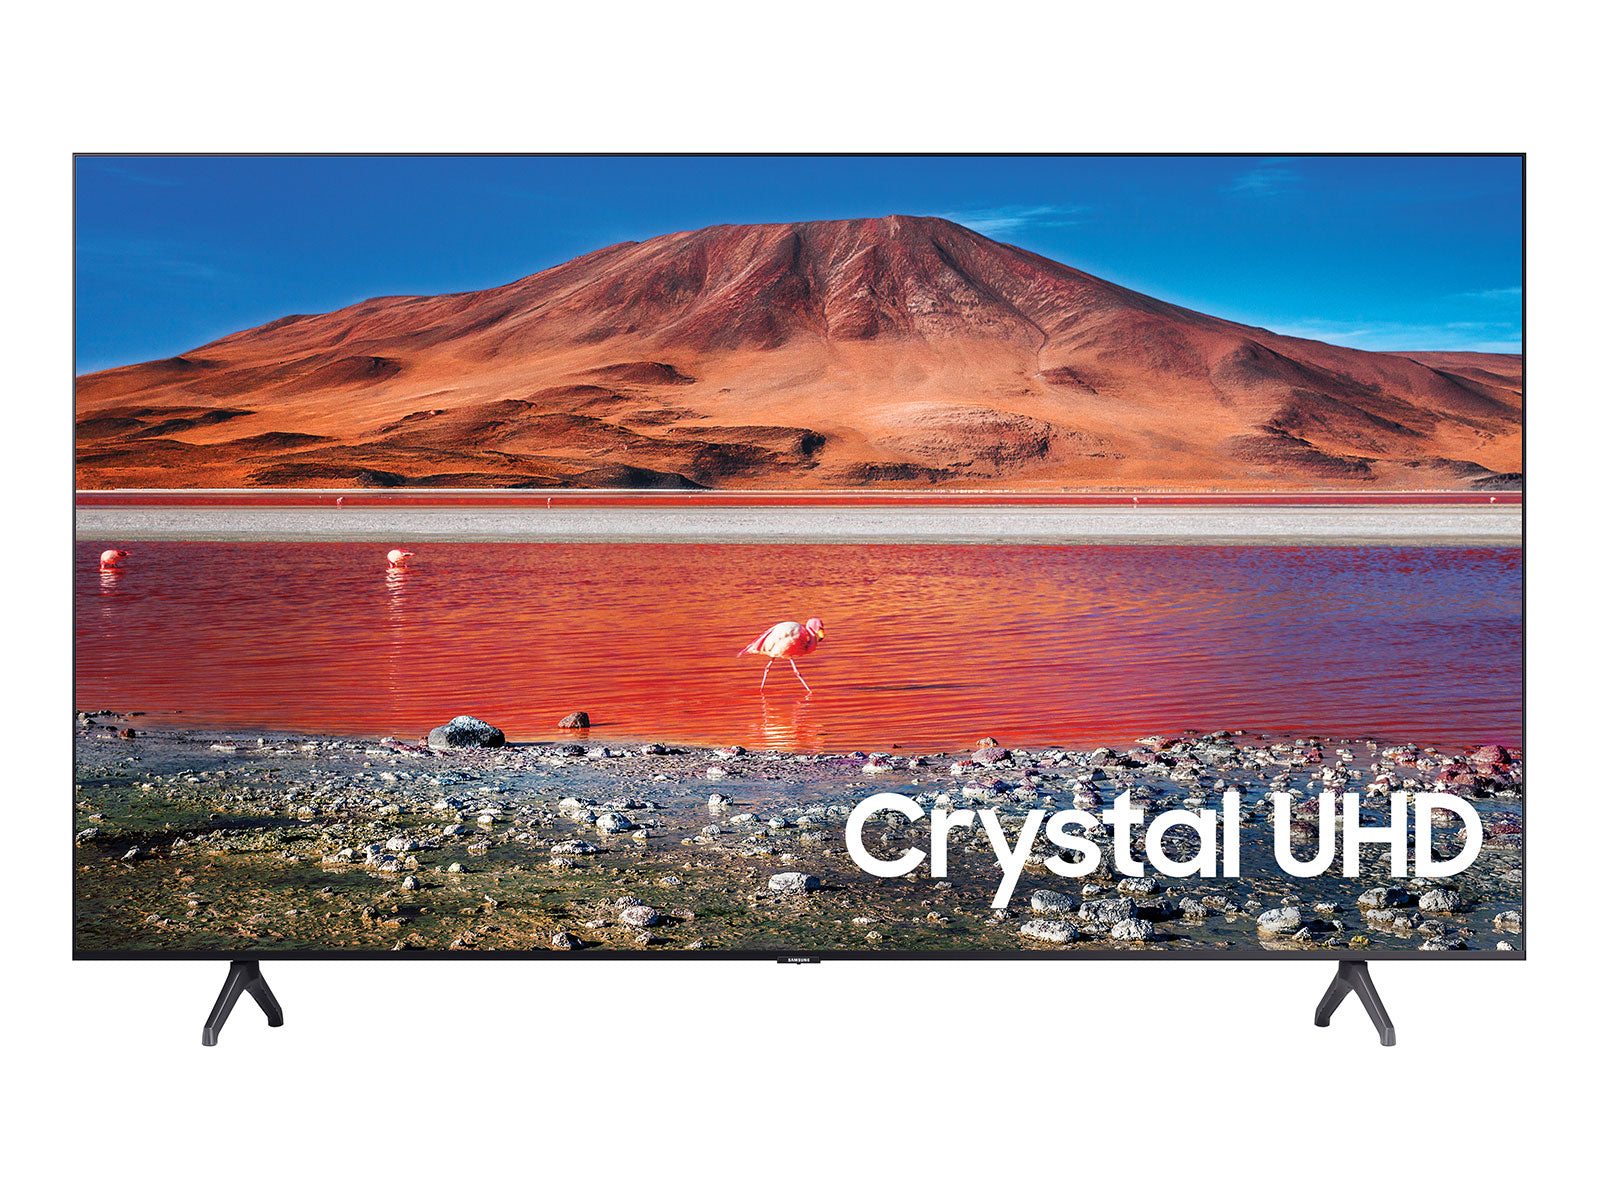 Samsung 55" Class 4K Crystal UHD HDR Smart TV(Refurbished) Tv's ONLY for delivery in San Diego and Tijuana